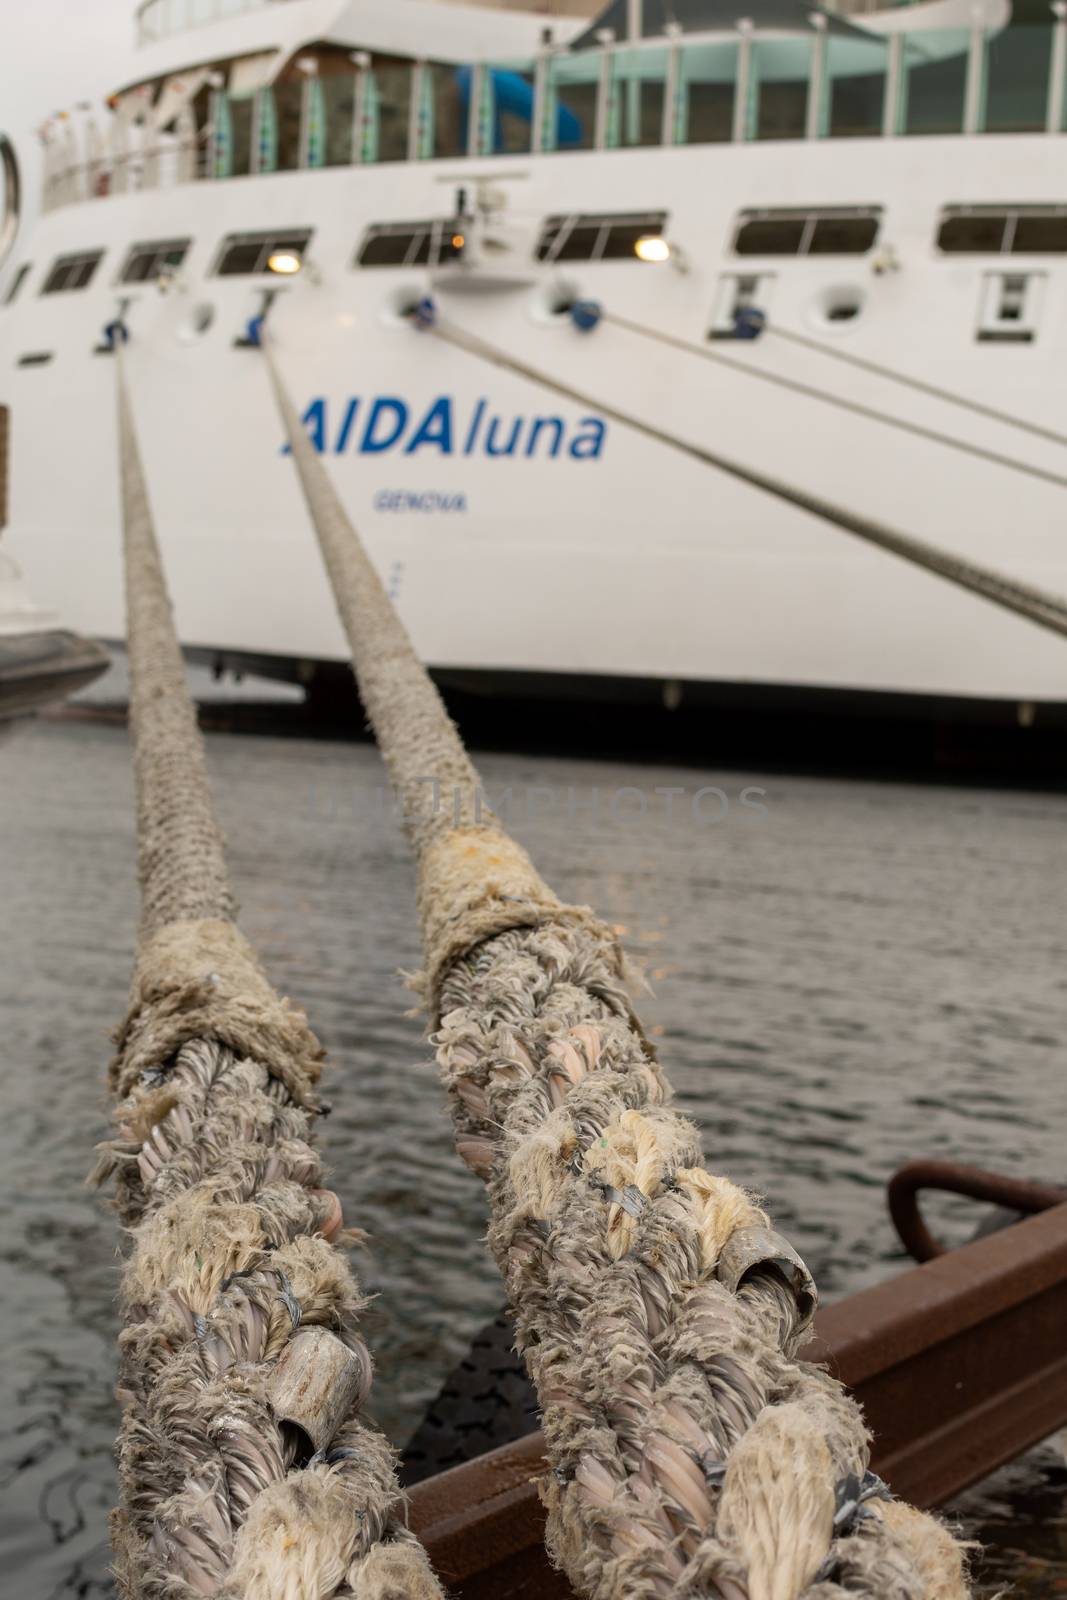 Aida Luna cruise ship moored in the harbor, ropes pulling the ship to quay. by kb79